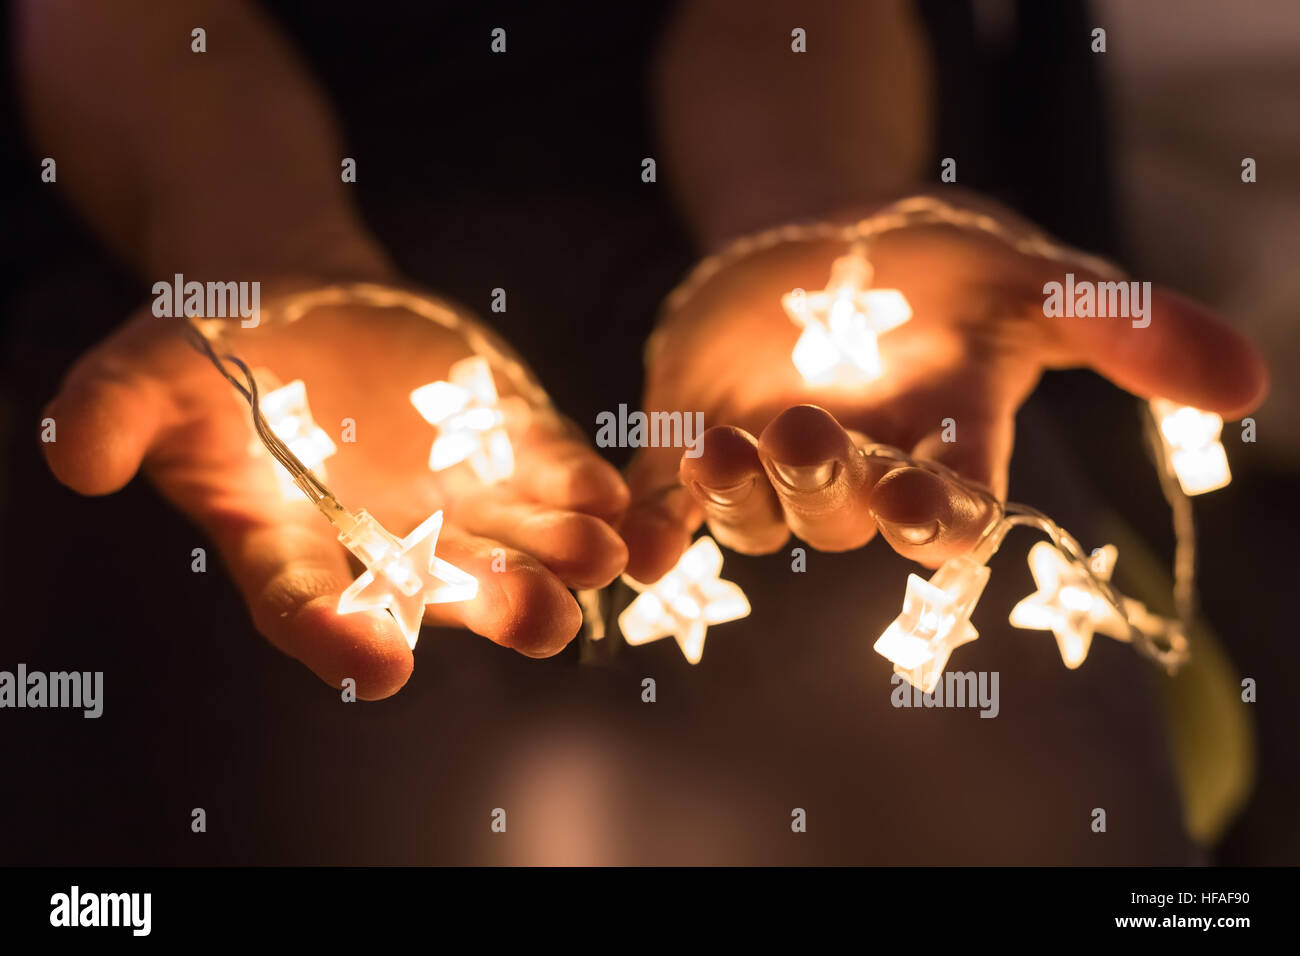 Hands holding shiny Christmas lights with star shapes Stock Photo